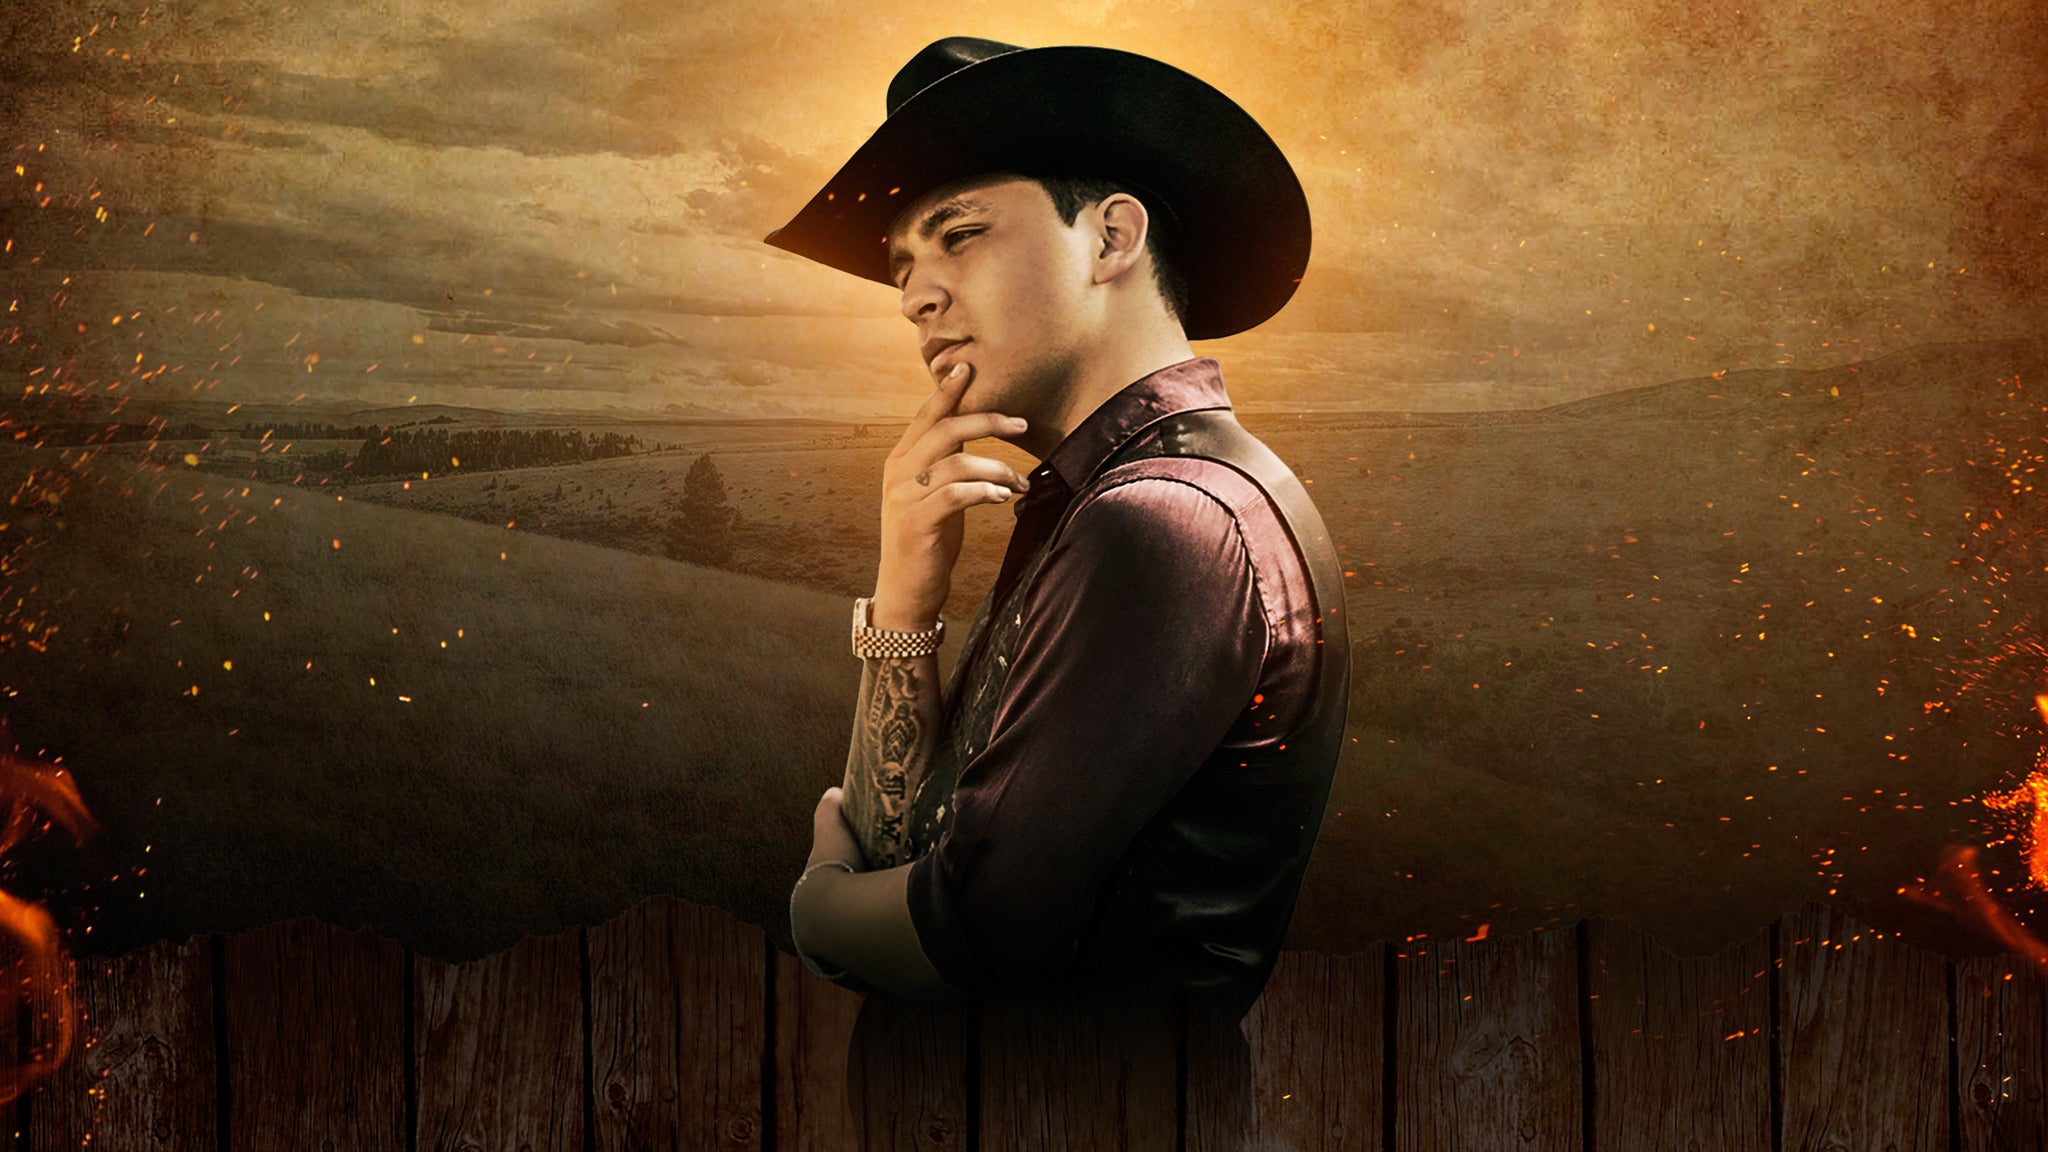 Christian Nodal - Ahora - SOLD OUT! in Hollywood promo photo for Live Nation Mobile App presale offer code